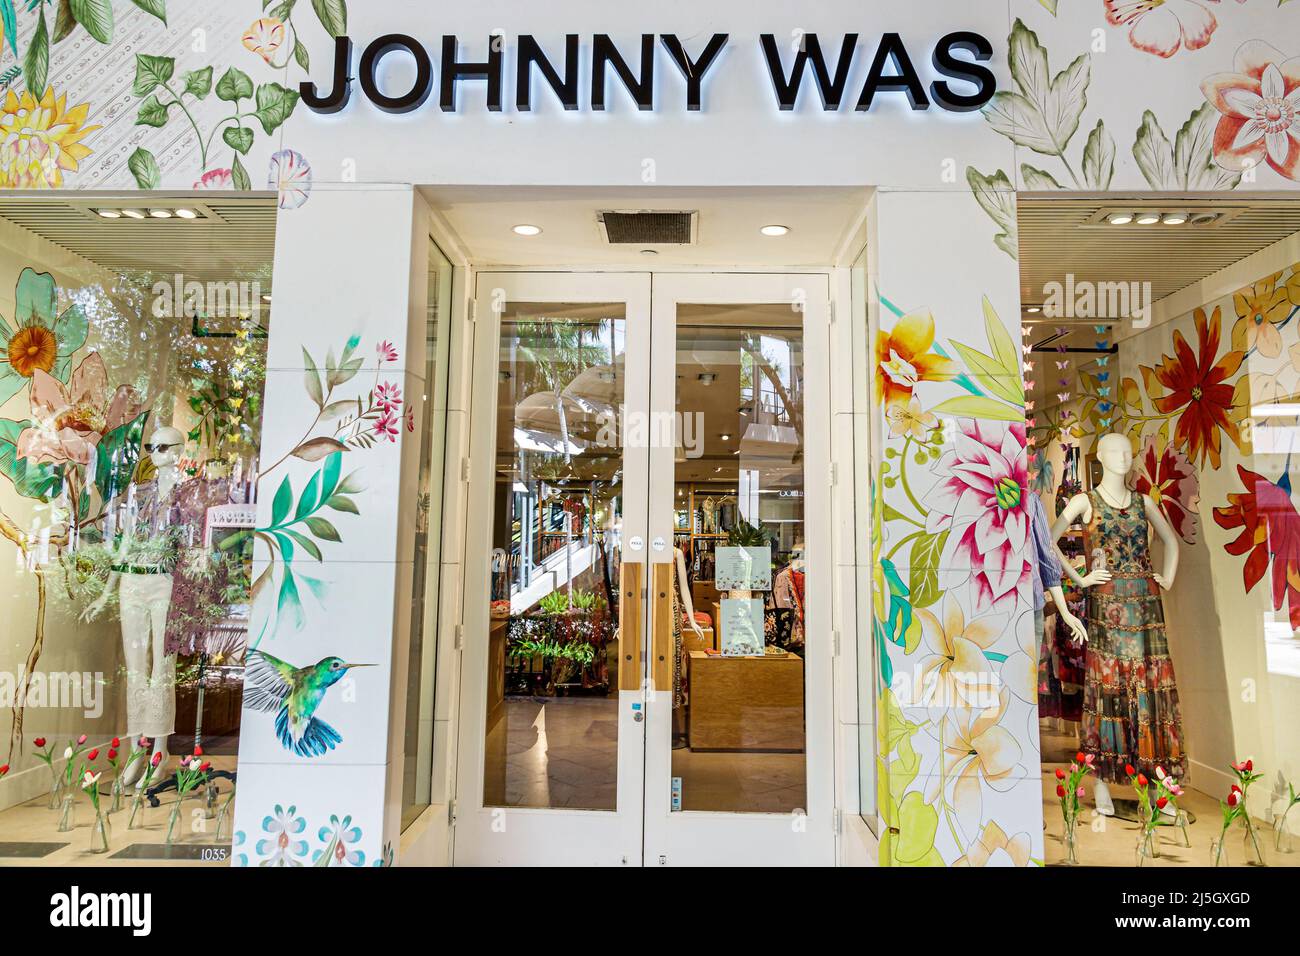 Miami Florida Coral Gables Shops at Merrick Park upscale outdoor shopping mall outside exterior entrance women's clothing Johnny Was fashion designer Stock Photo